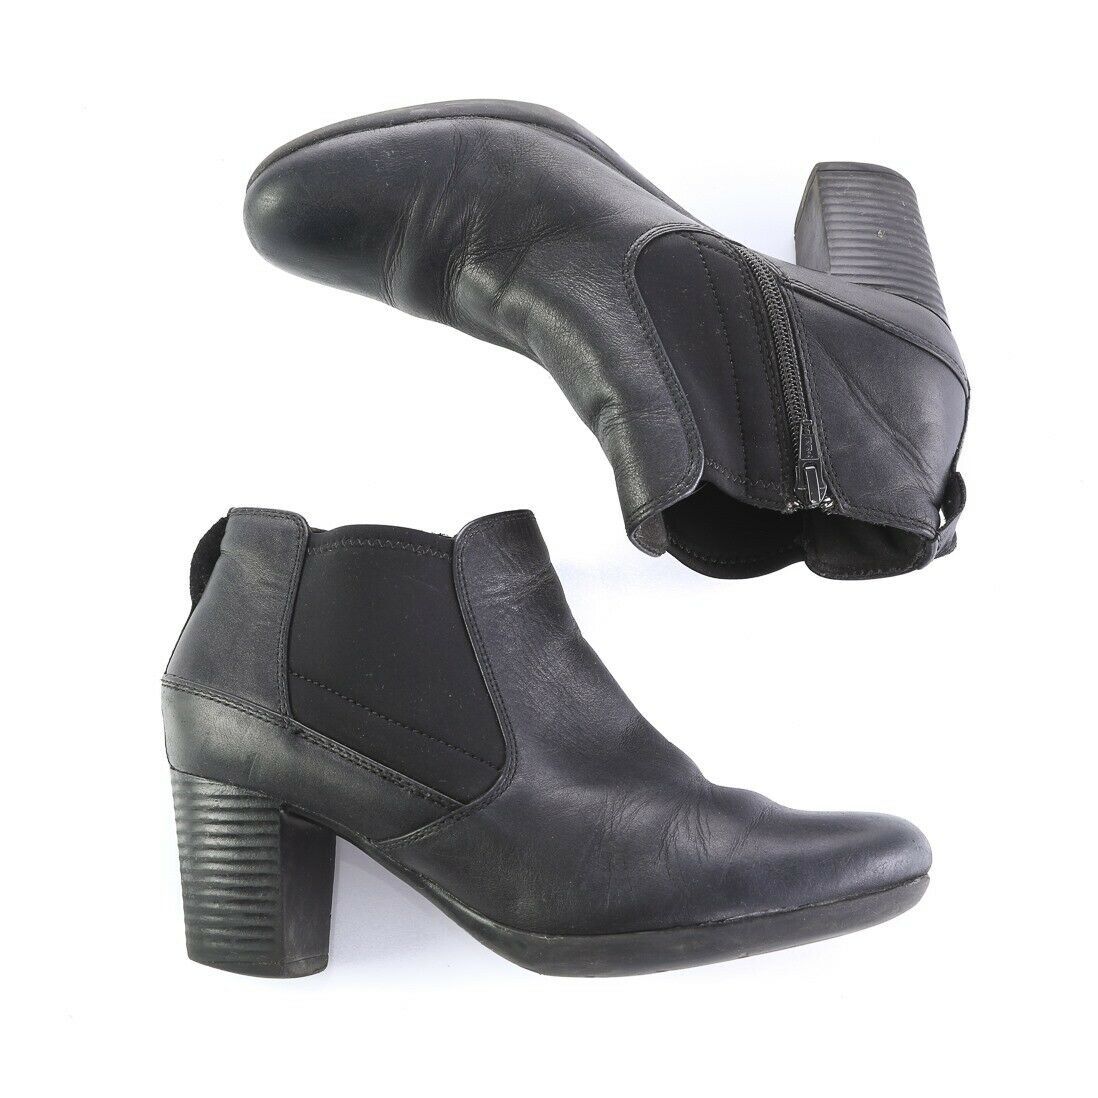 Clarks Black Leather Ankle Boots Booties Block Heels Shoes Zipper Womens 8 M - $24.63